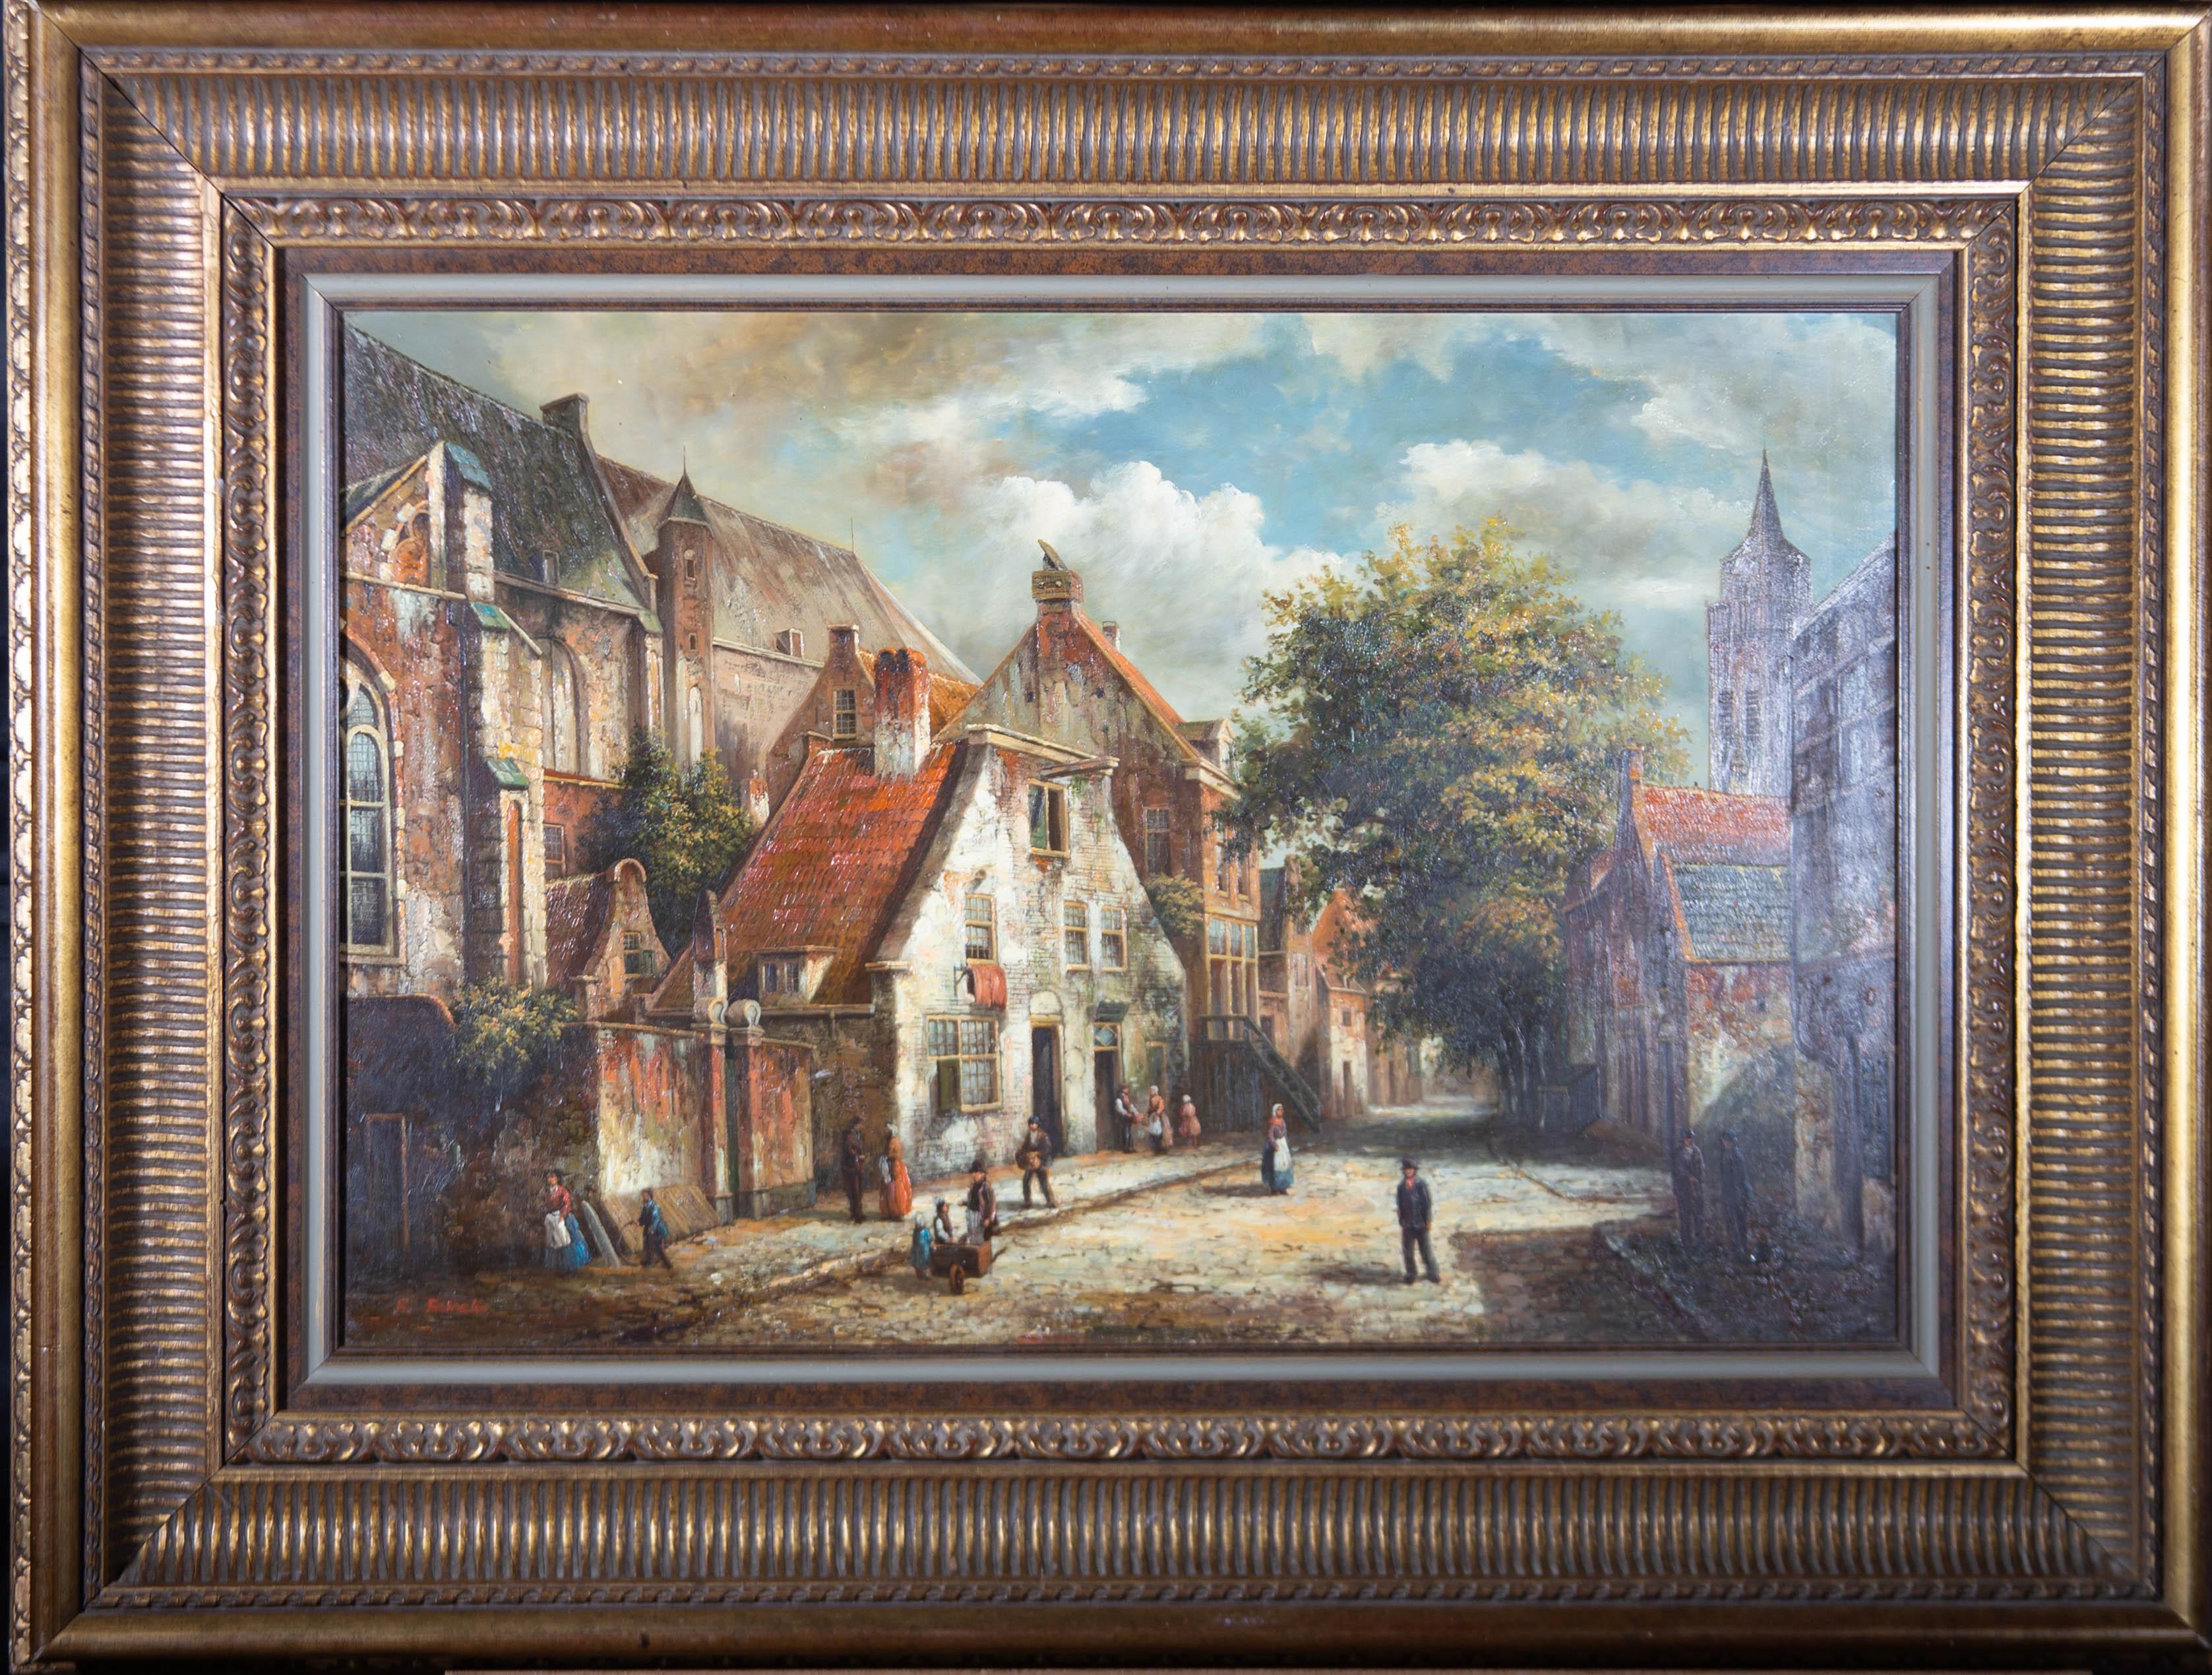 A continental, possibly Dutch, historic street scene. Presented in a substantial gilt-effect wooden frame with a fluted cove. Signed to the lower-left edge. On panel.
